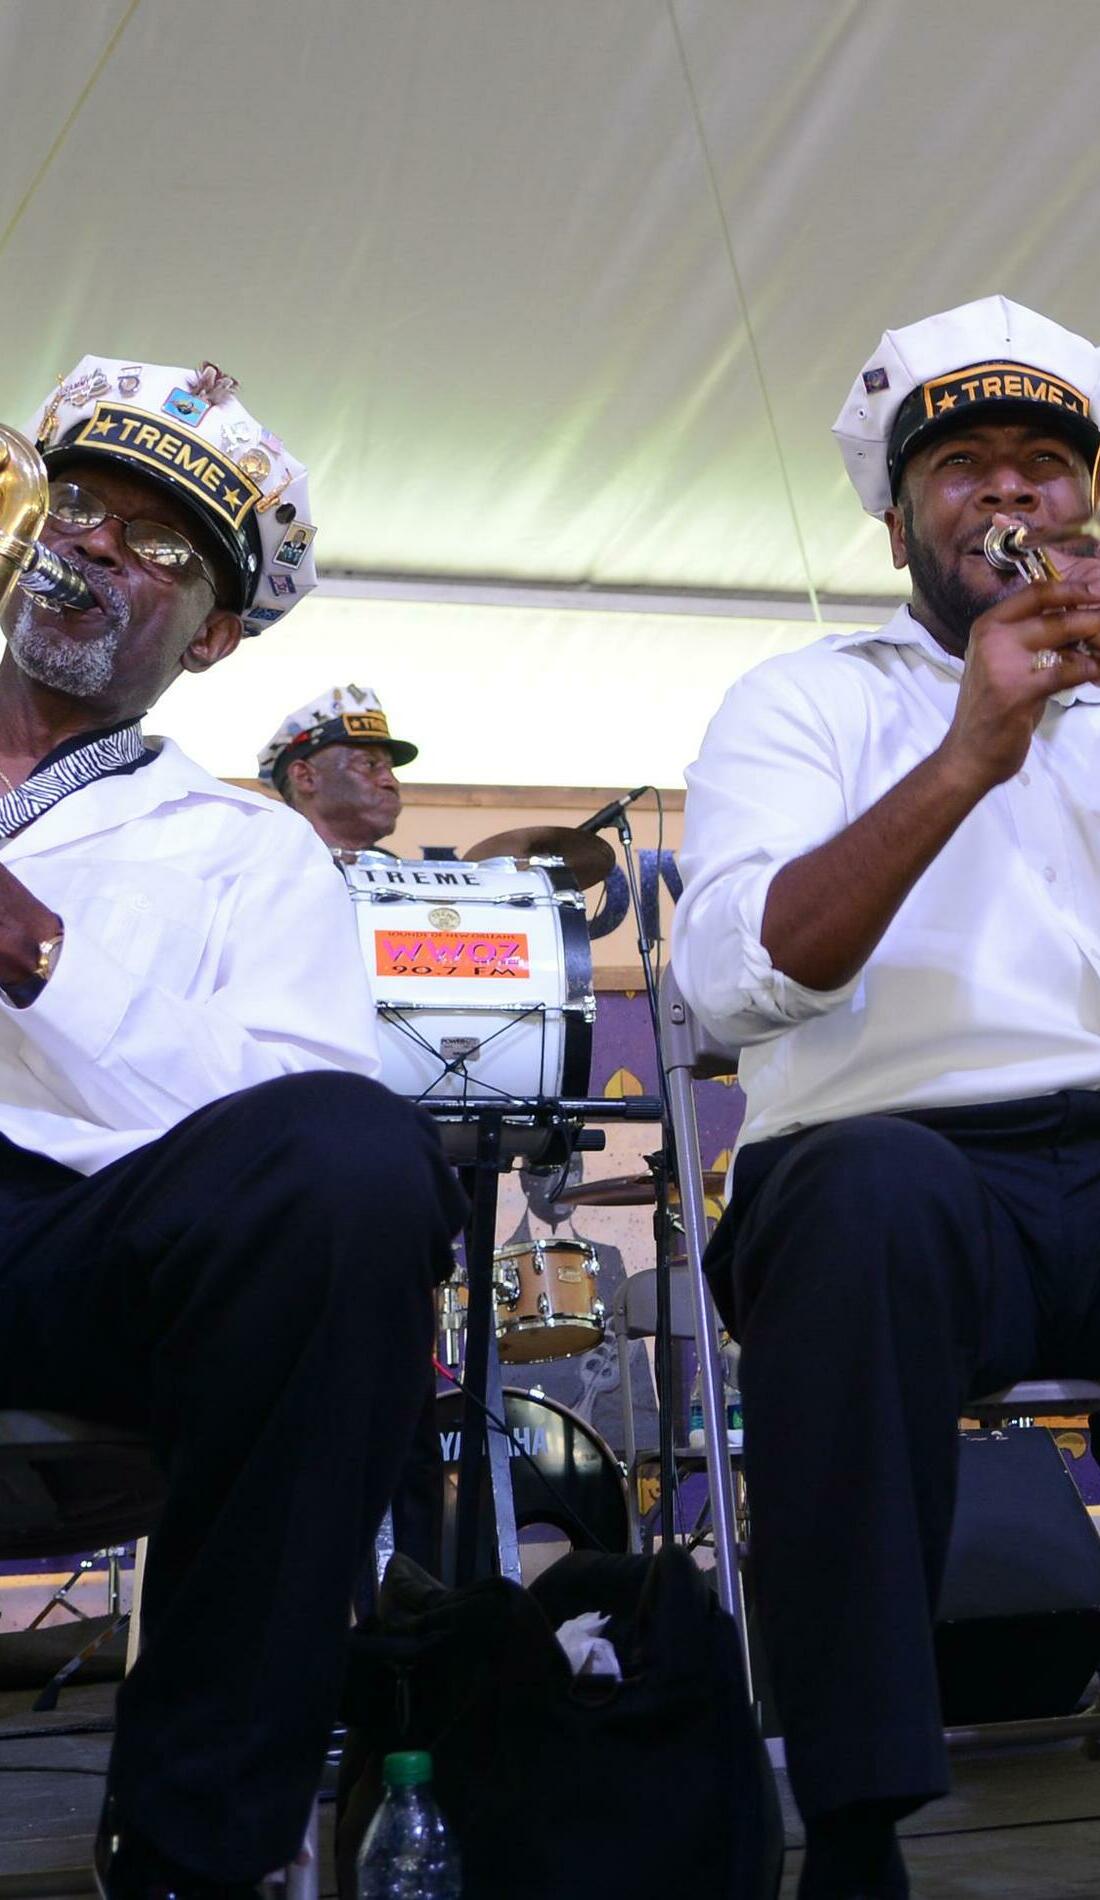 A Treme Brass Band live event